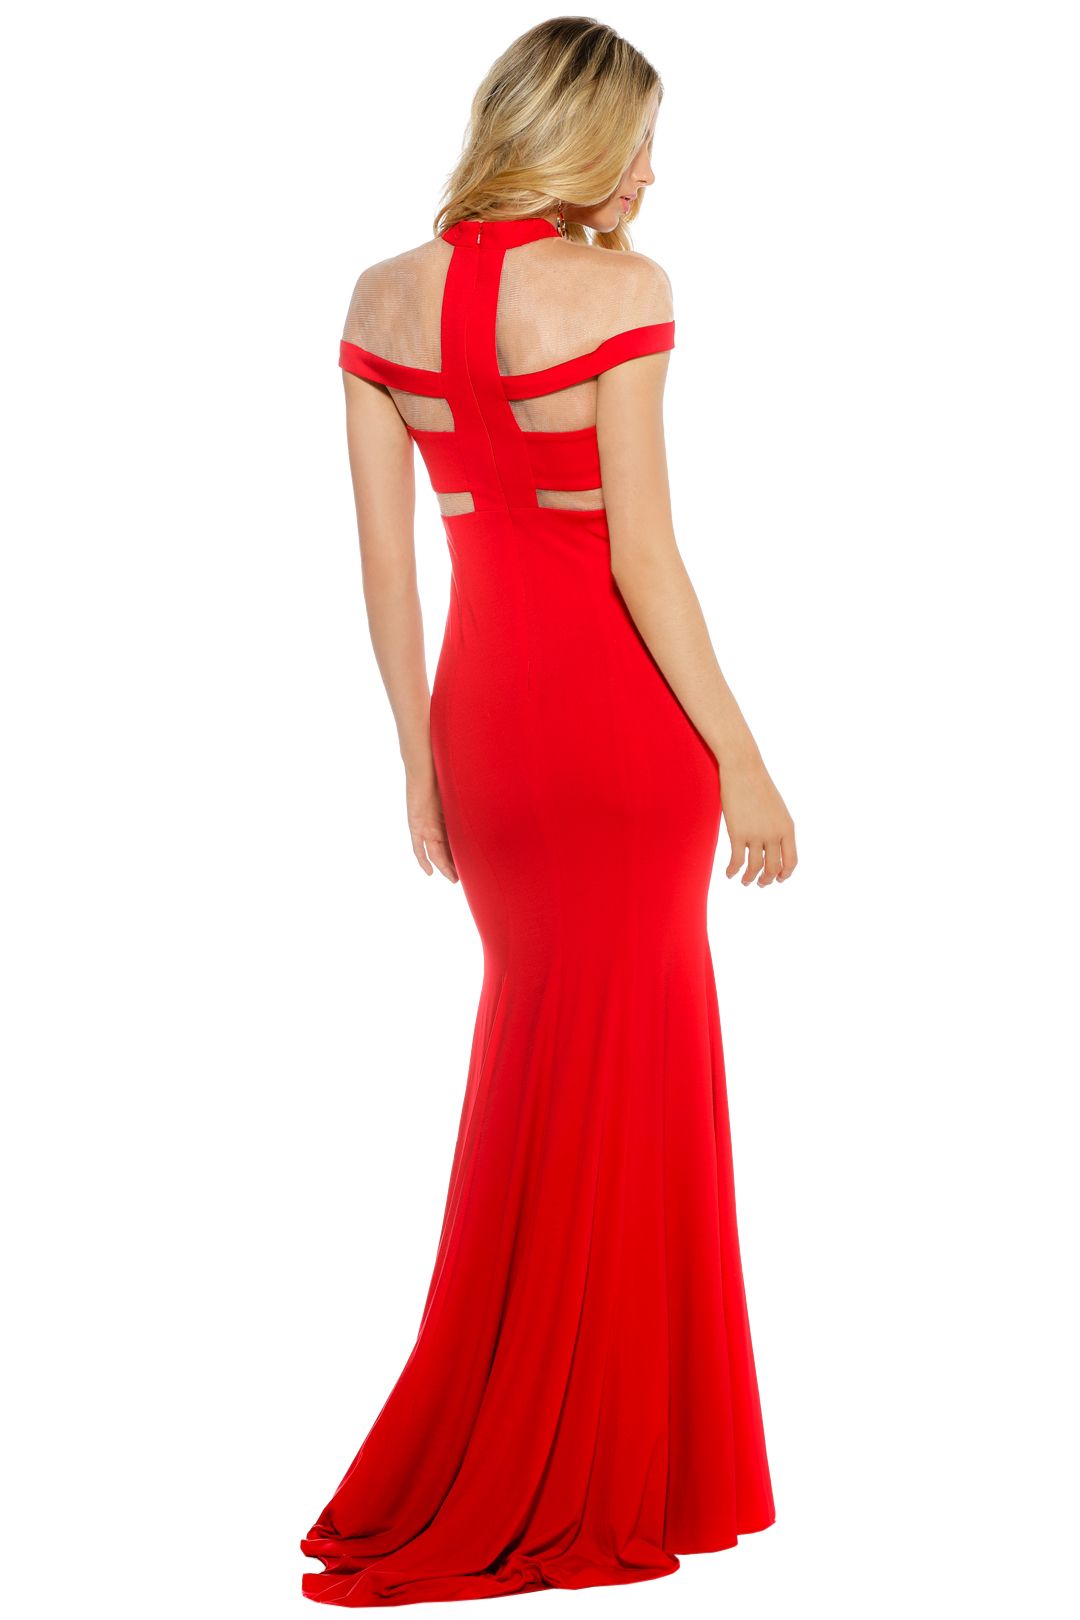 Grace & Hart - Muse Gown - Ruby Red - Back